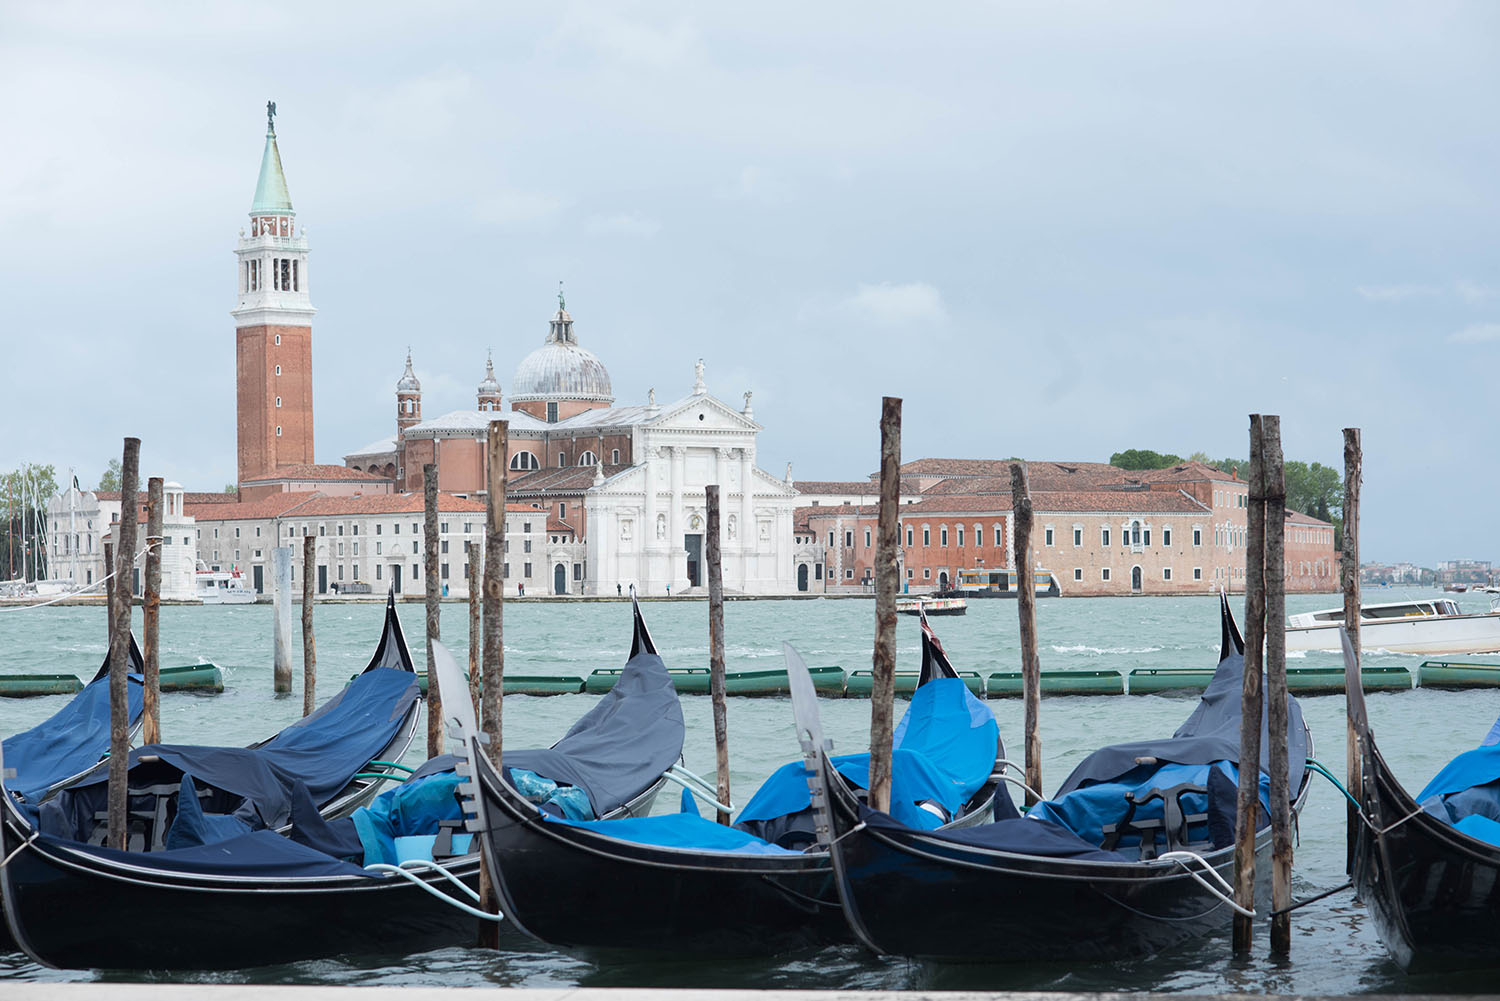 Gondolas float on the Grand Canal in Venice, as photographed by Winnipeg travel blogger Cee Fardoe of Coco & Vera